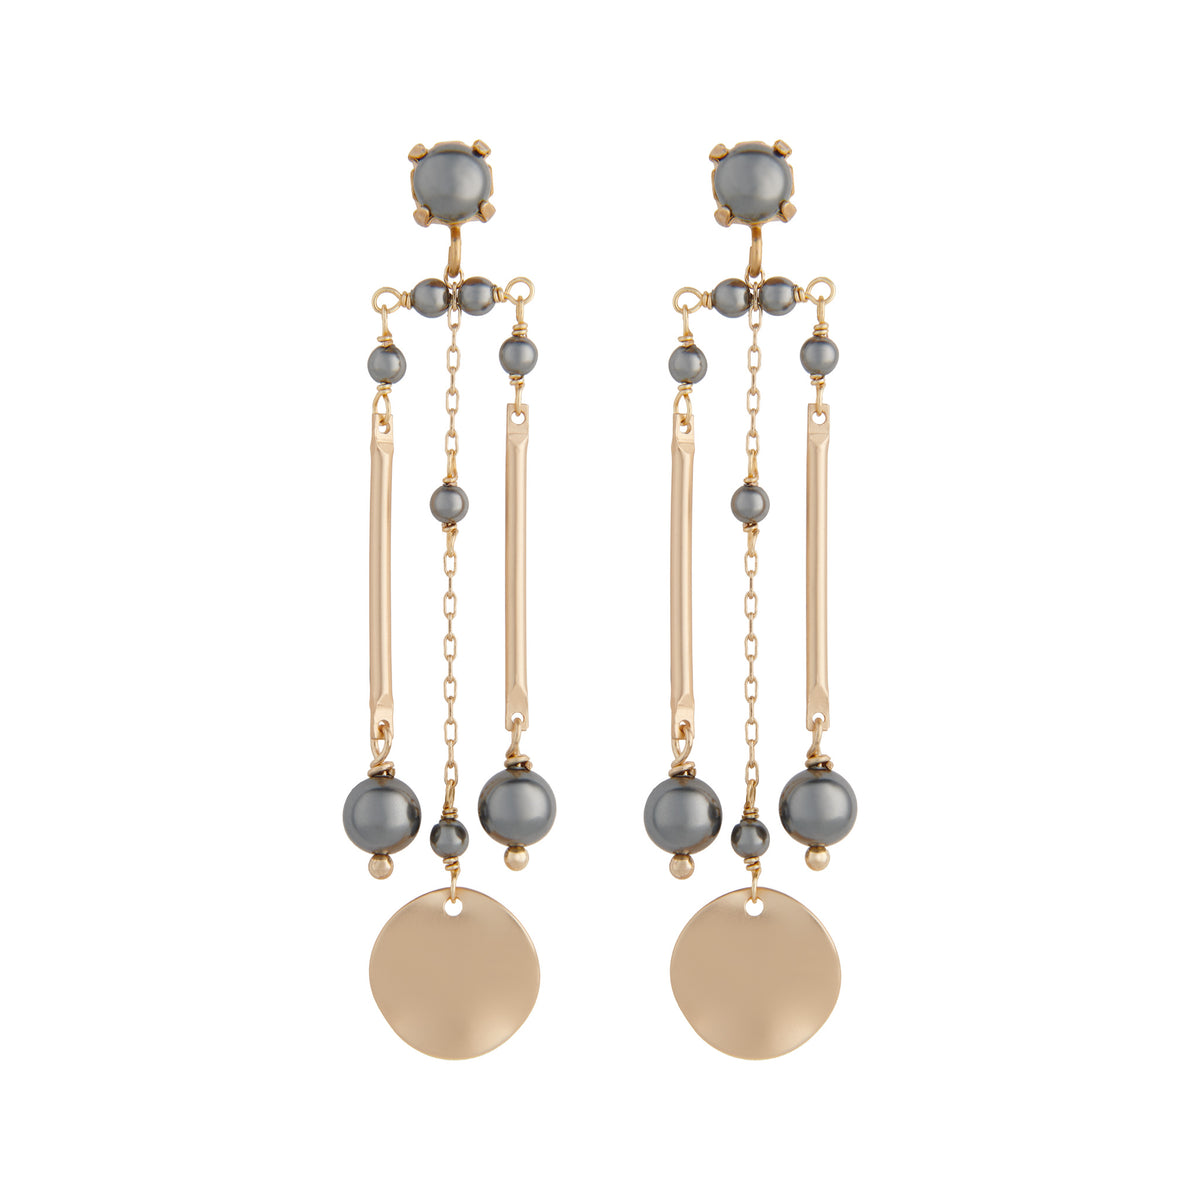 Matte gold and grey pearl column earrings by vivien walsh